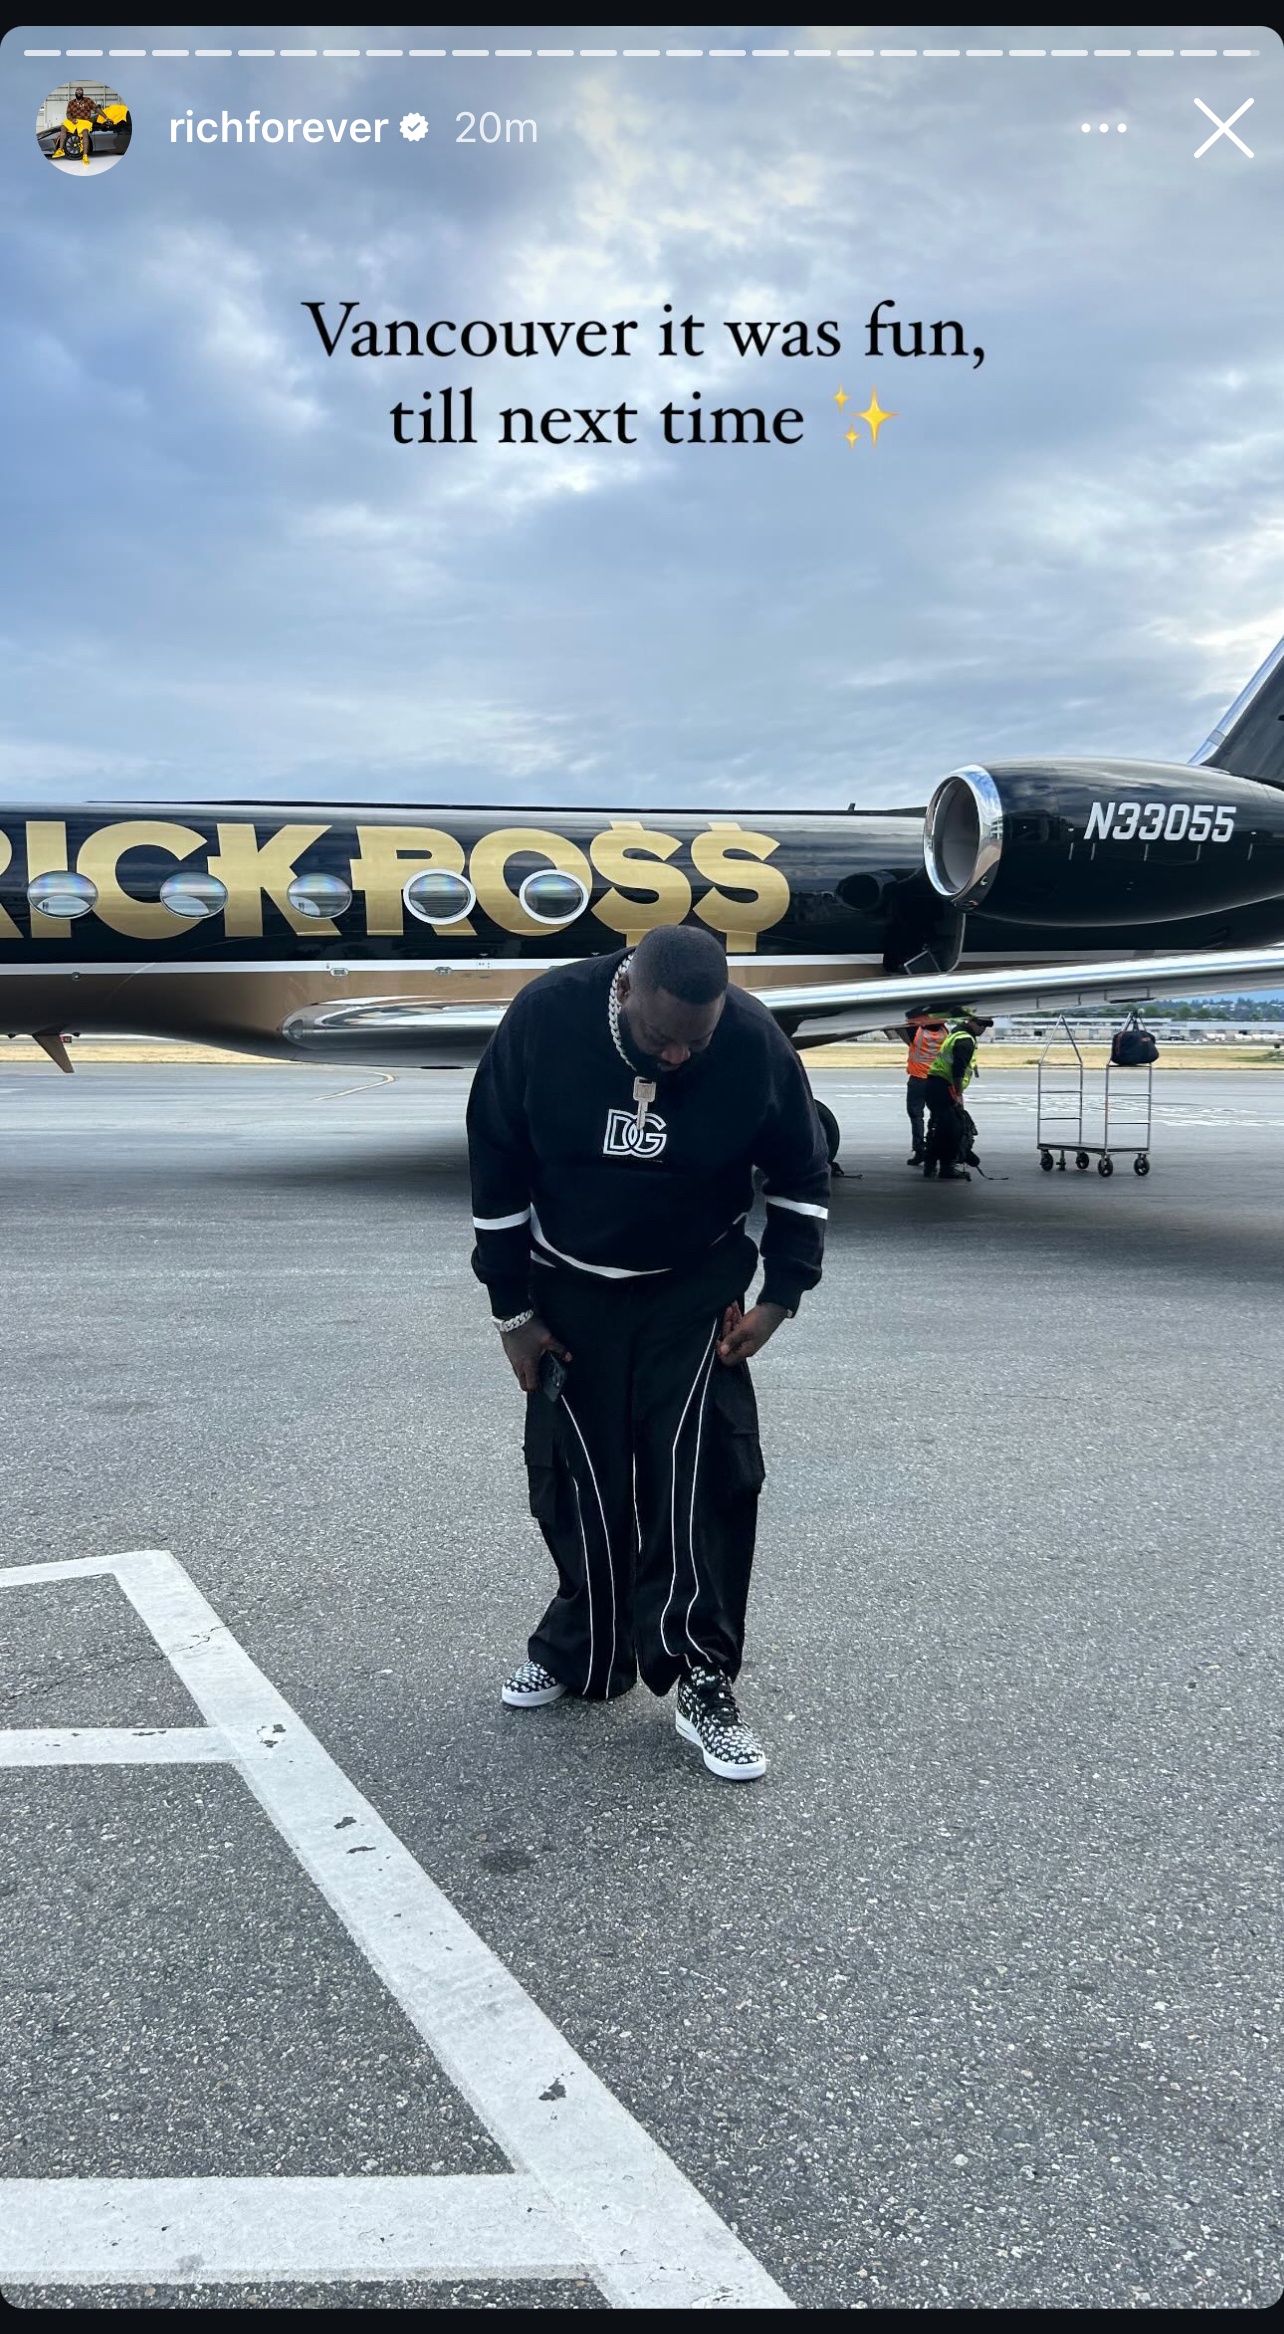 Rick Ross stands by a private jet with his name on it, captioned &quot;Vancouver it was fun, till next time.&quot; He wears a black outfit with white details